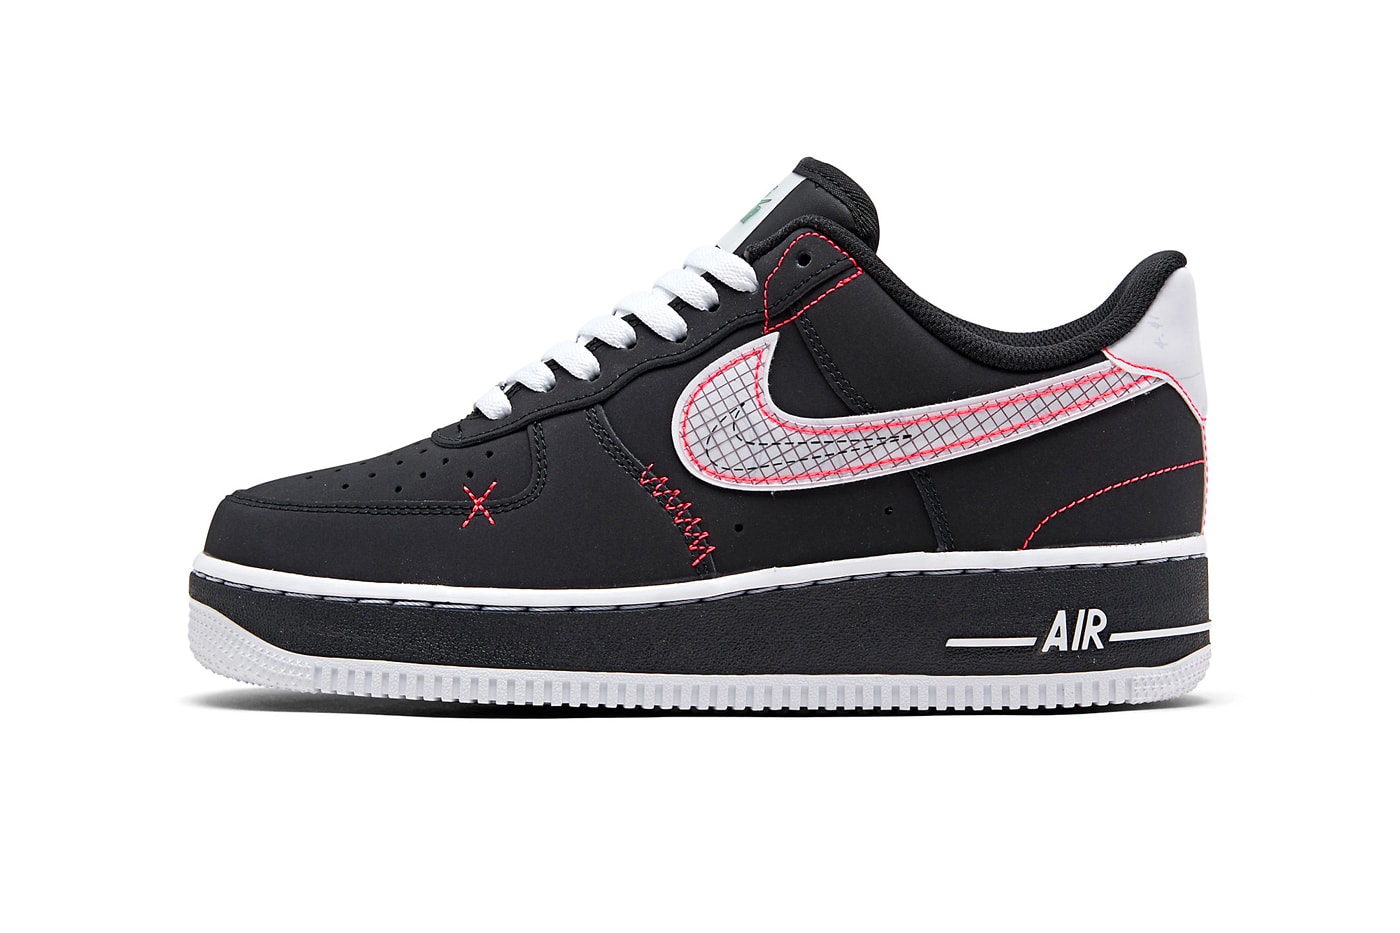 Nike Air Force 1 LV8 2 GS Misplaced Swooshes Sneakers